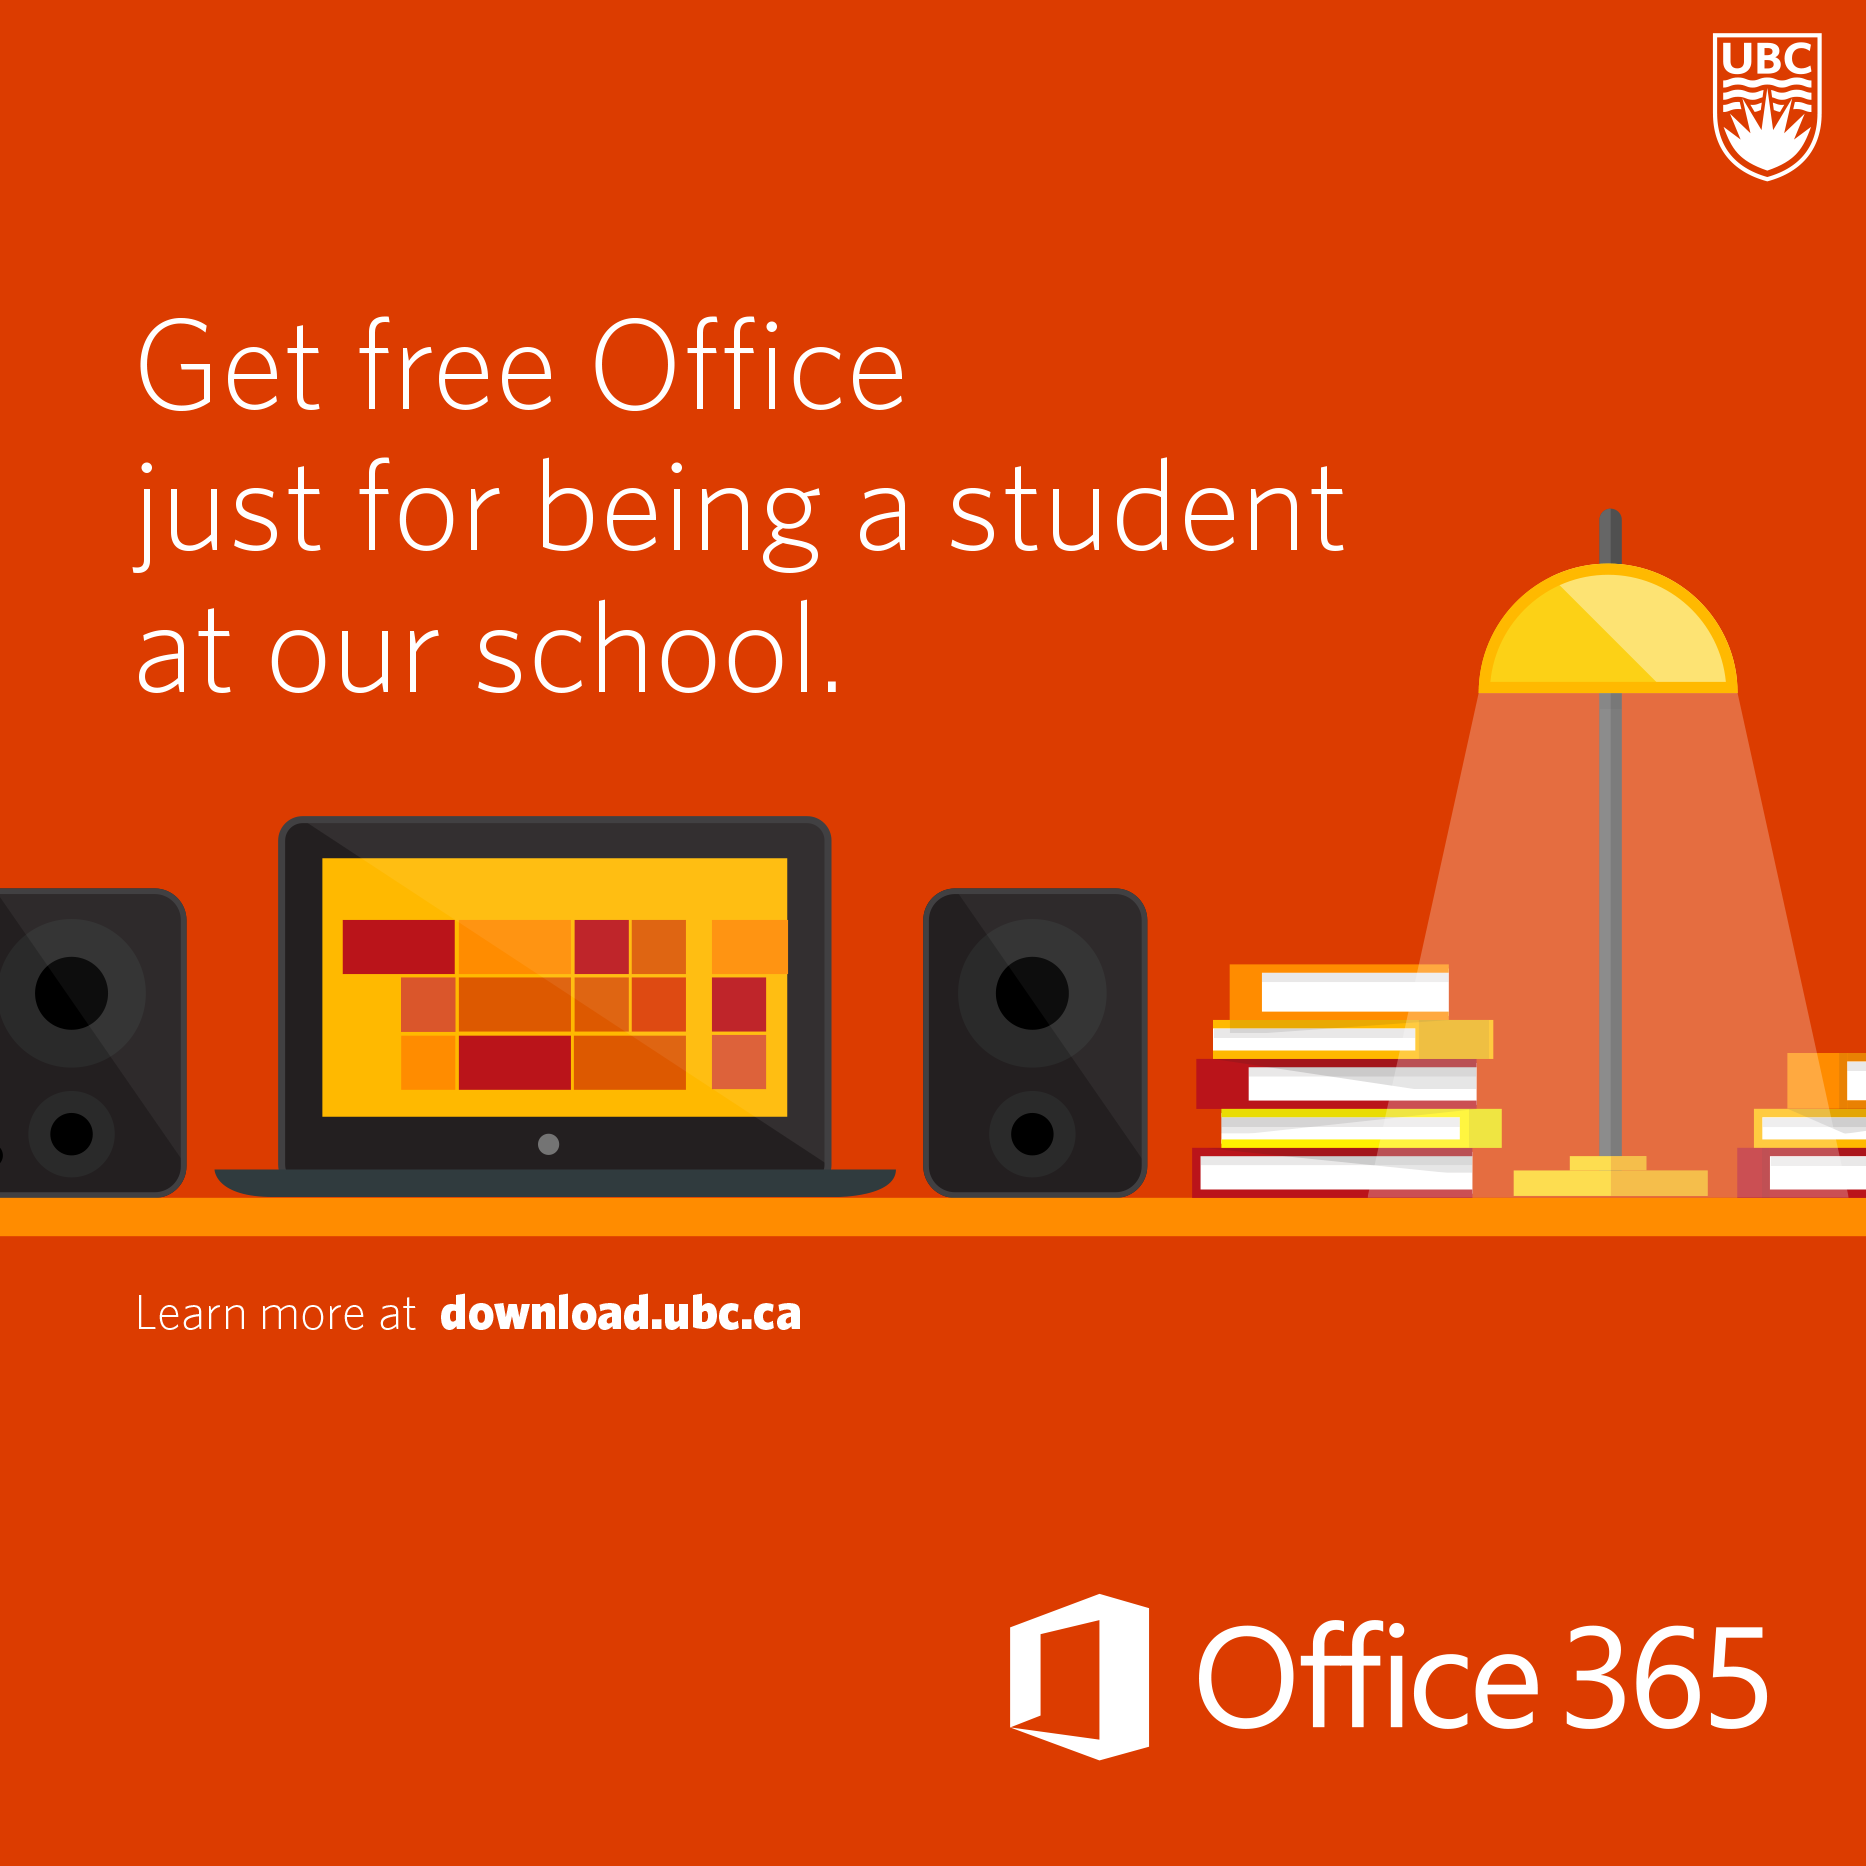 microsoft office 365 free download for students